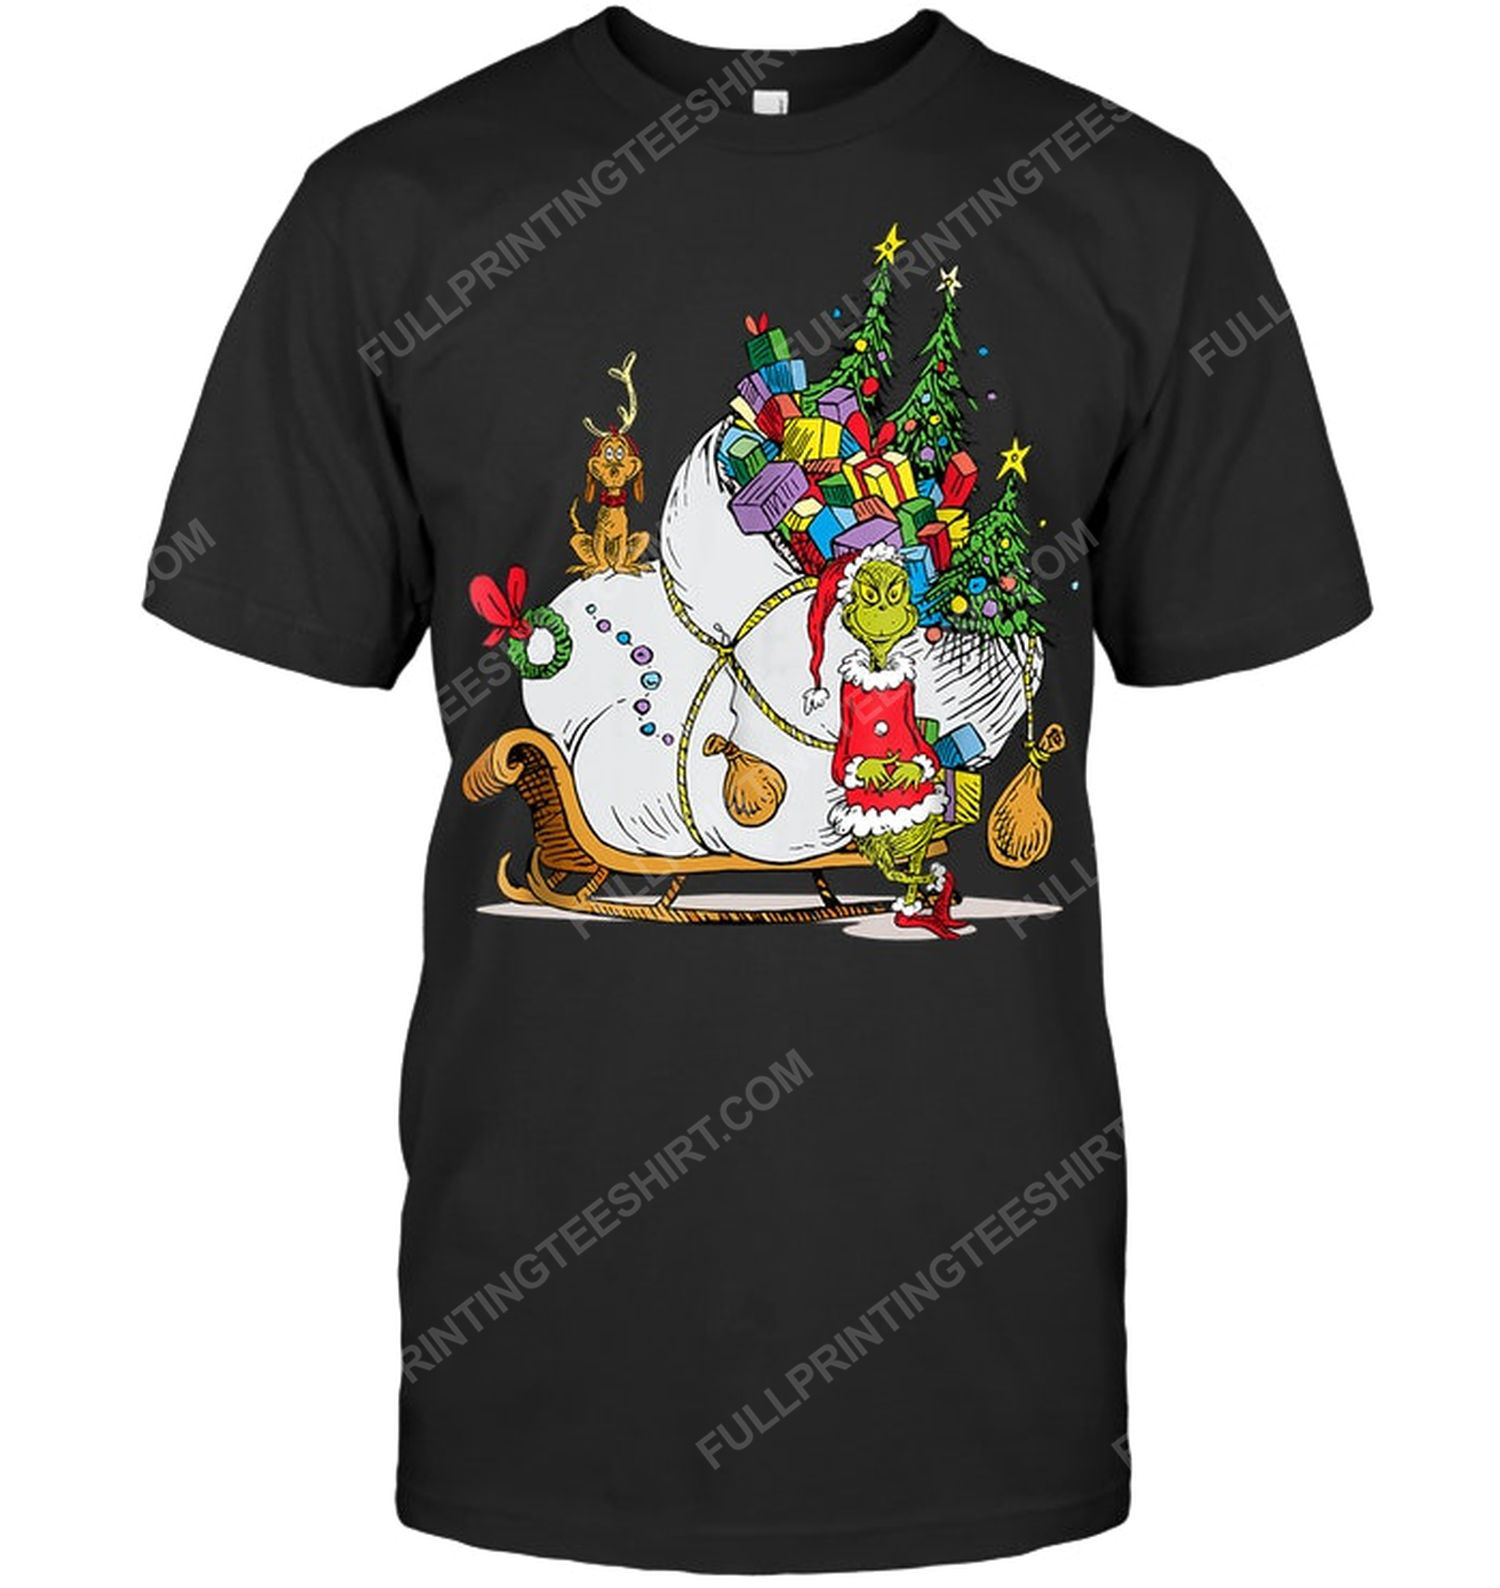 The grinch and christmas gifts tshirt